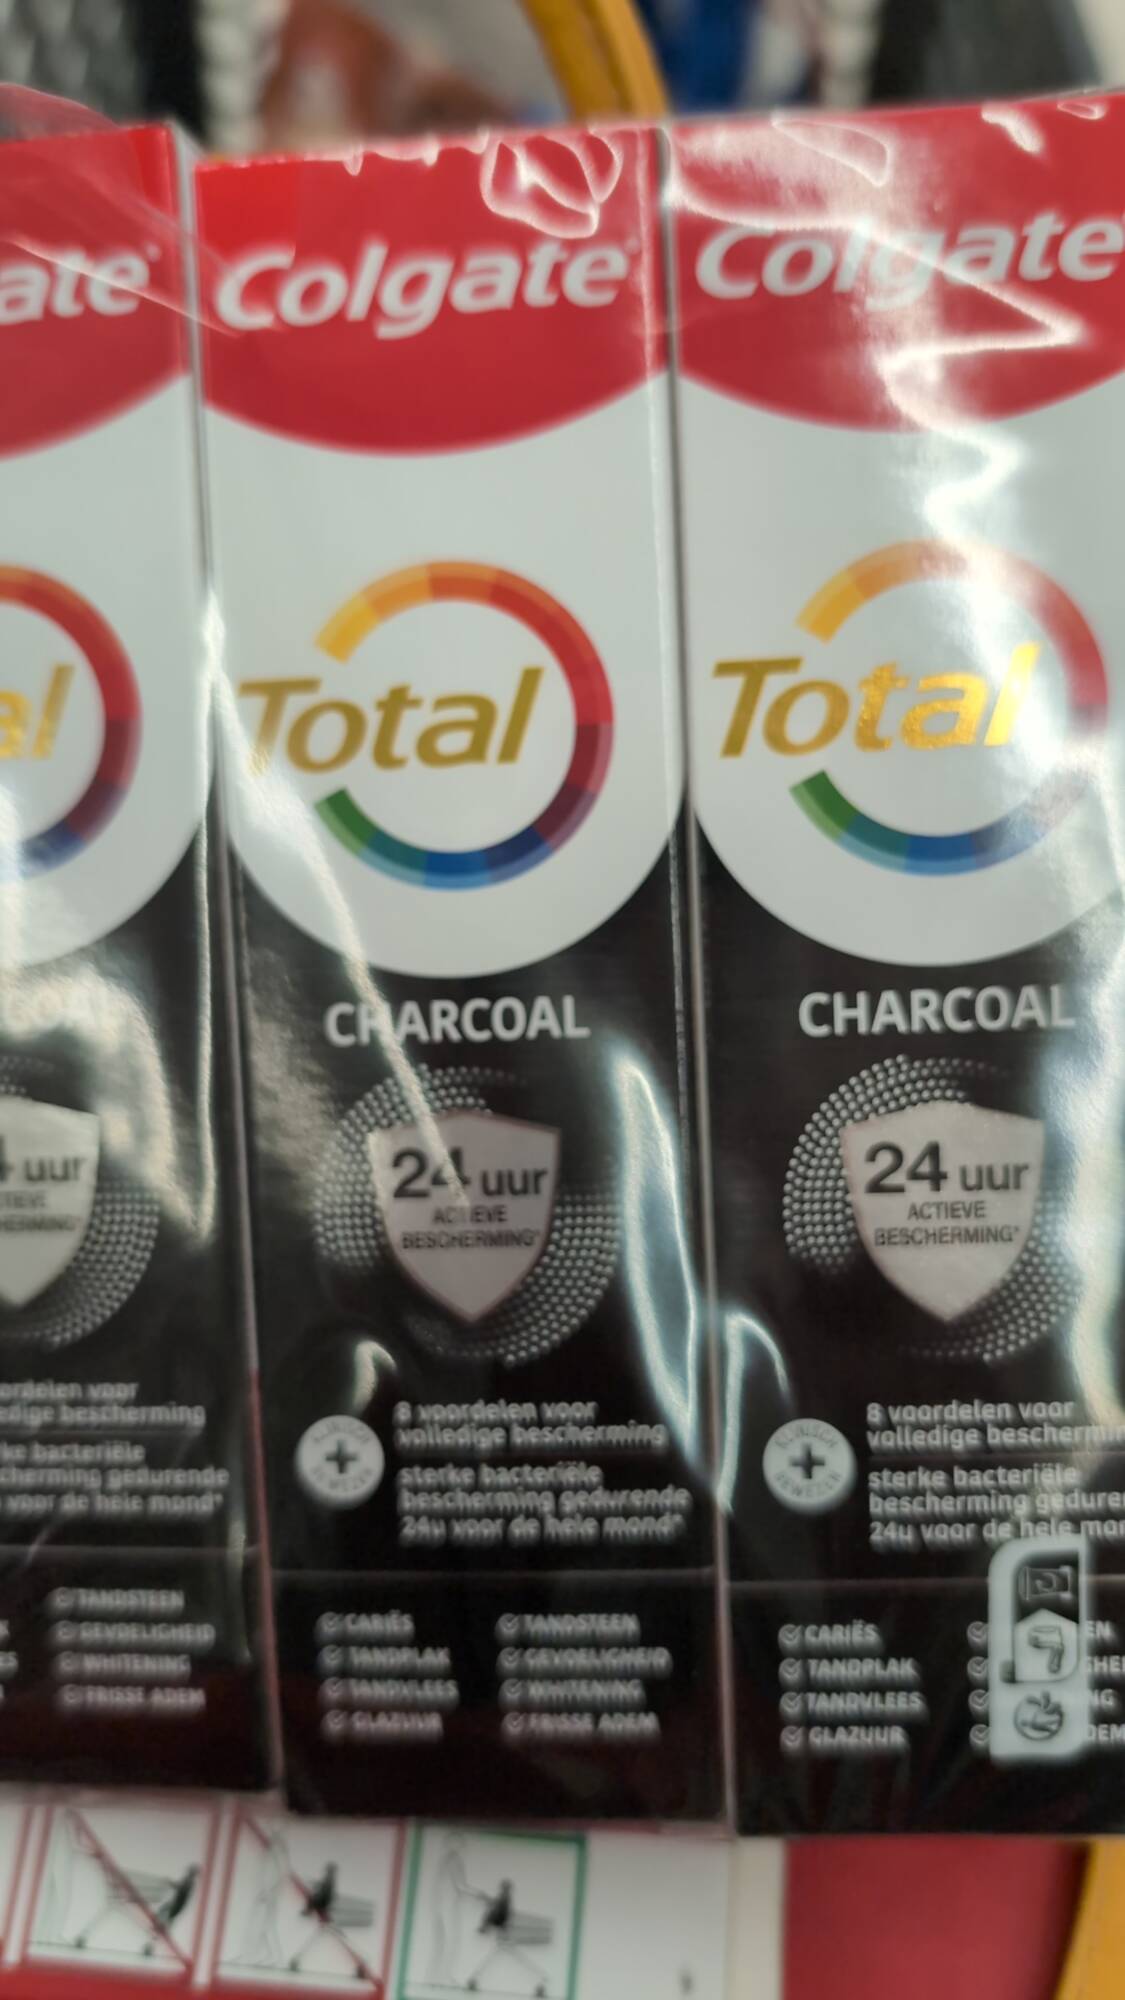 COLGATE - Total Charcoal - Dentifrice 